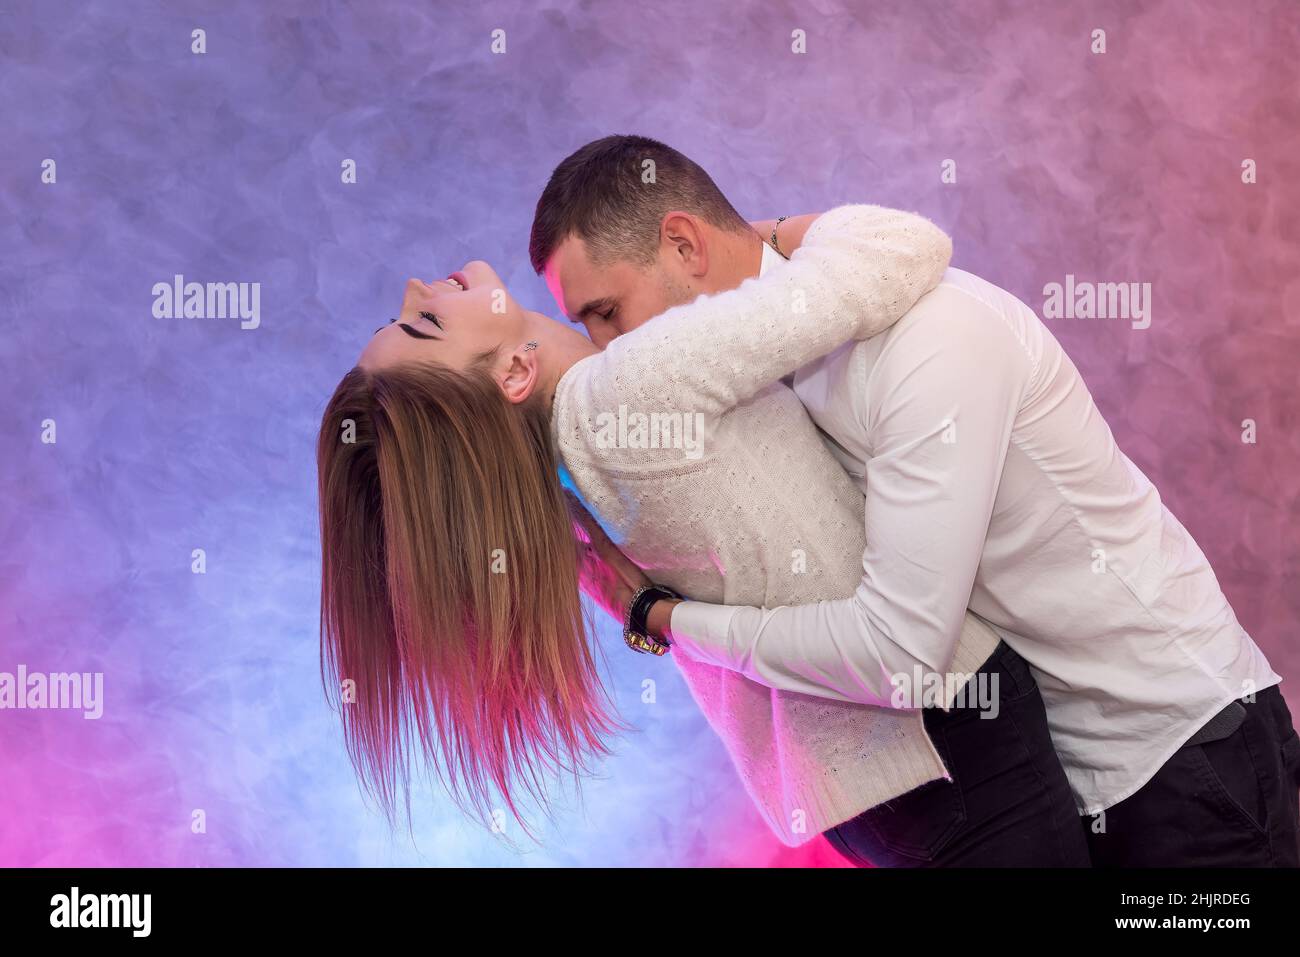 Couple in love posing hugging. Valentines day. Passion and feelings between young people Stock Photo